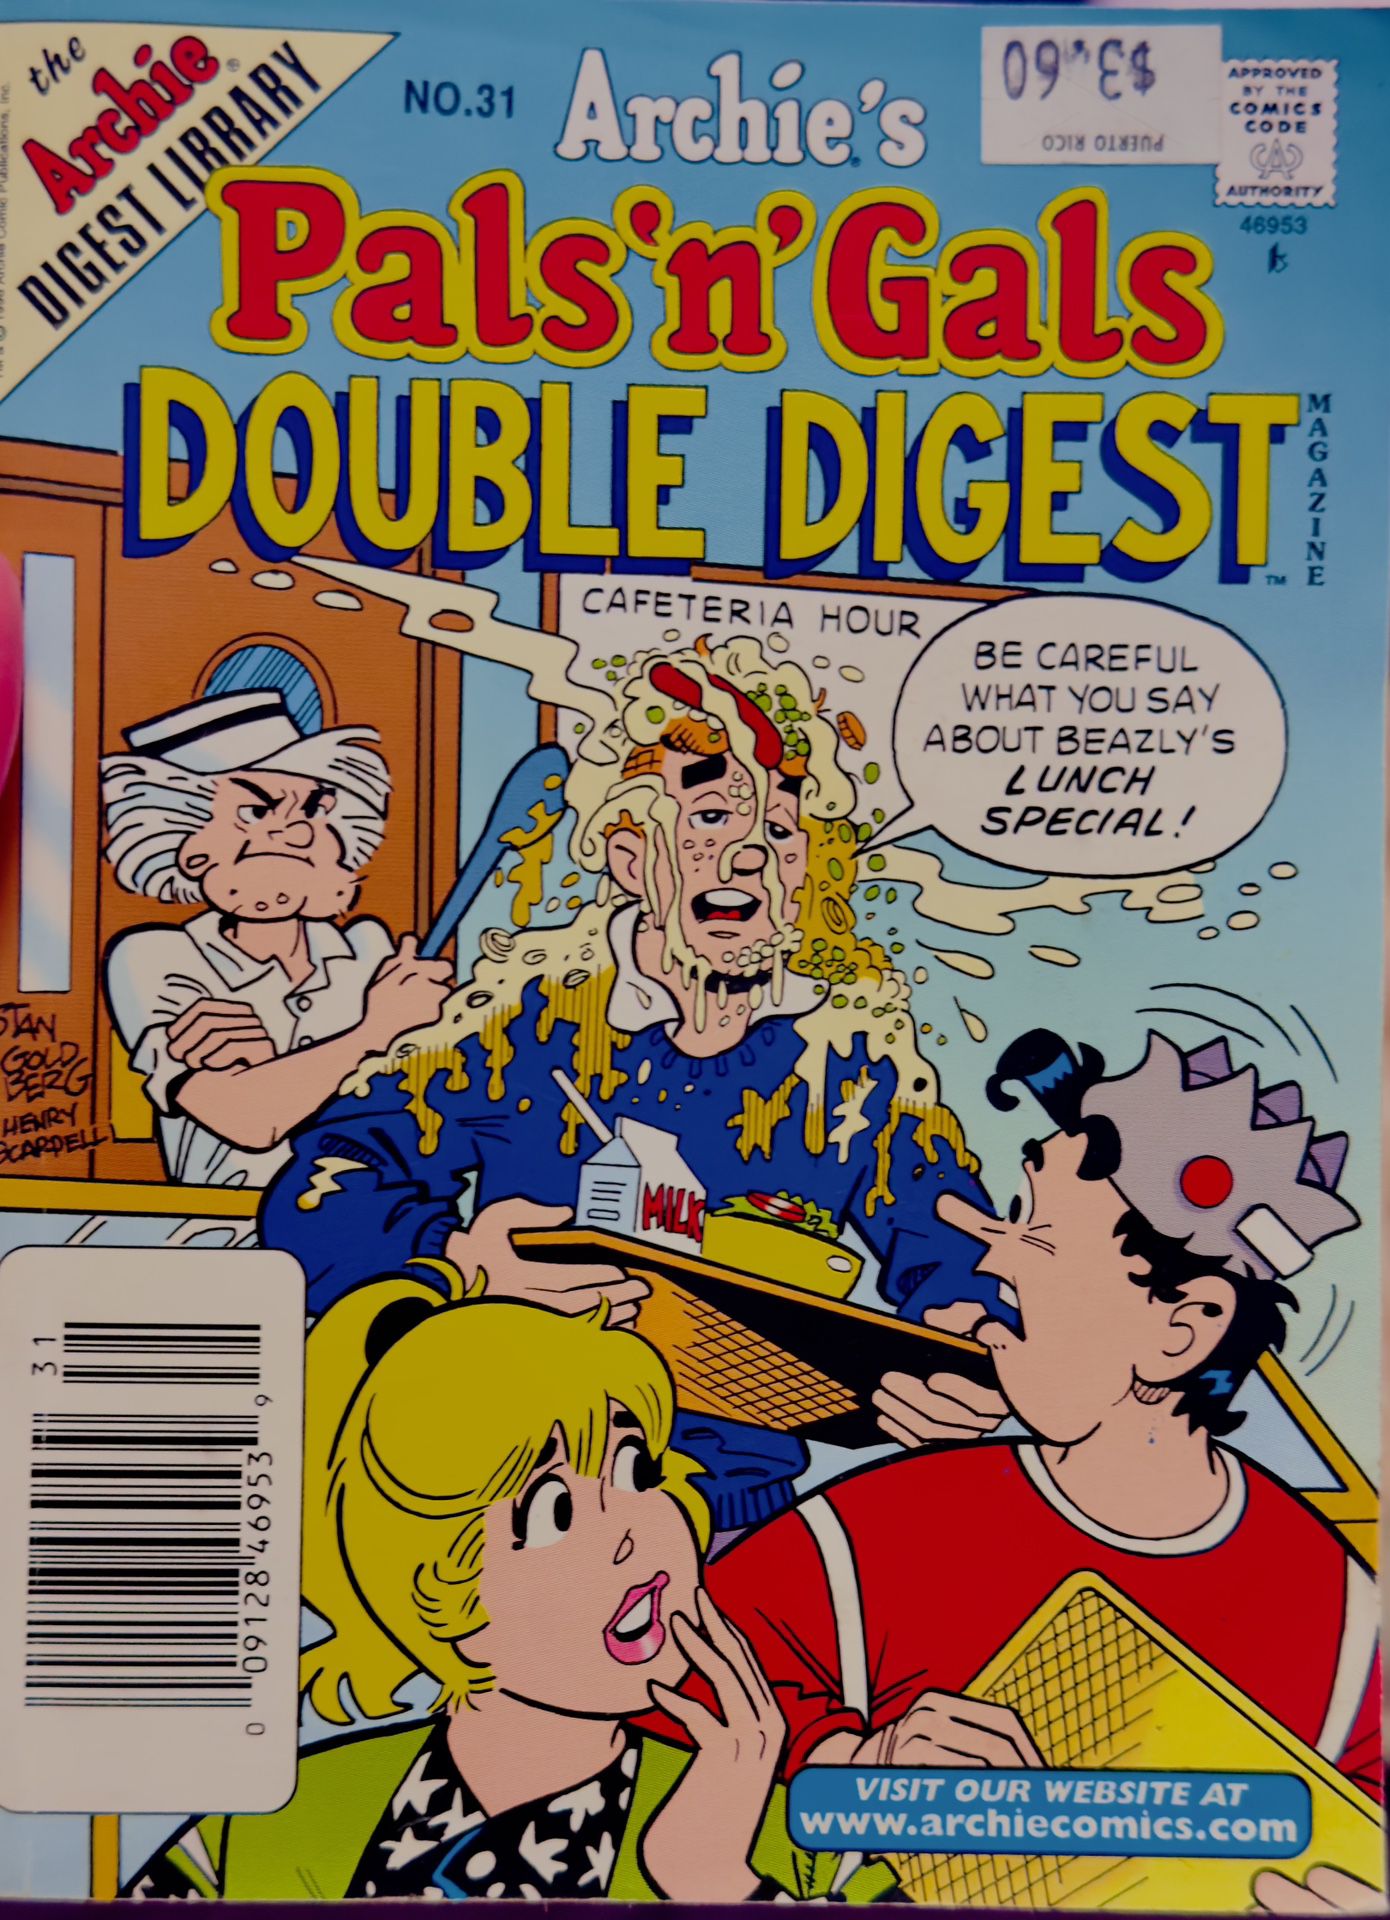 Archie’s Pals ‘n’ Gals DOUBLE DIGEST Issue No. 31